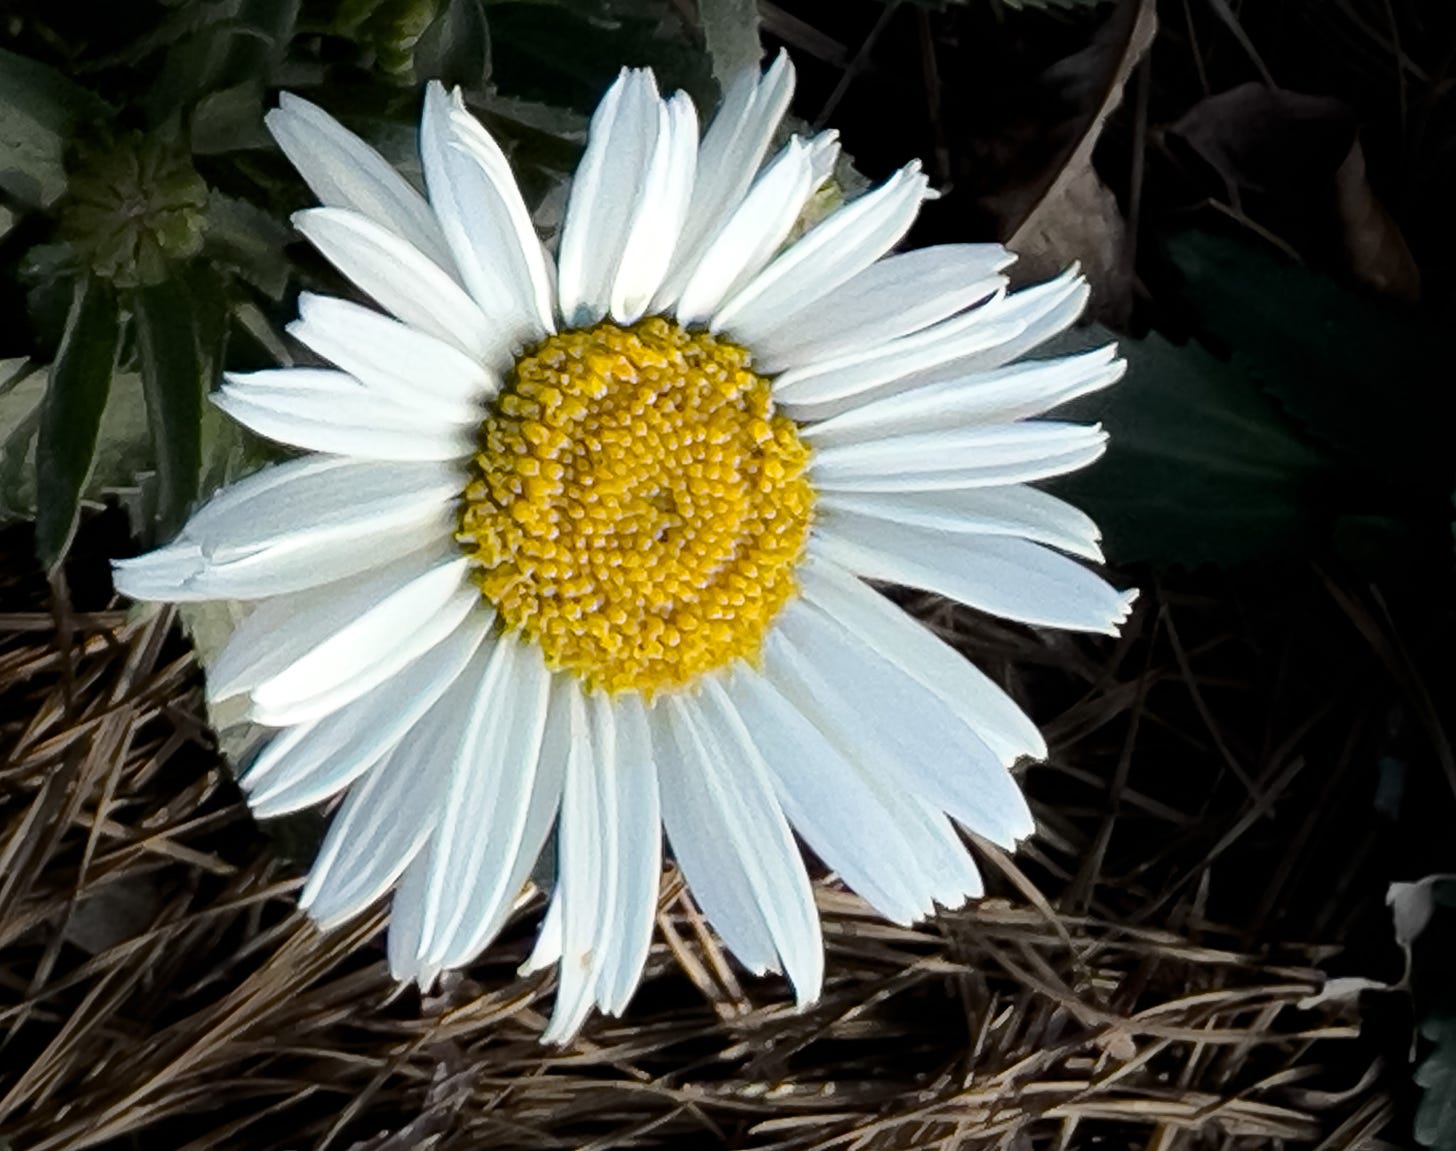 A single Shasta Daisy with white petals and yellow center with the pineneedle ground behind it